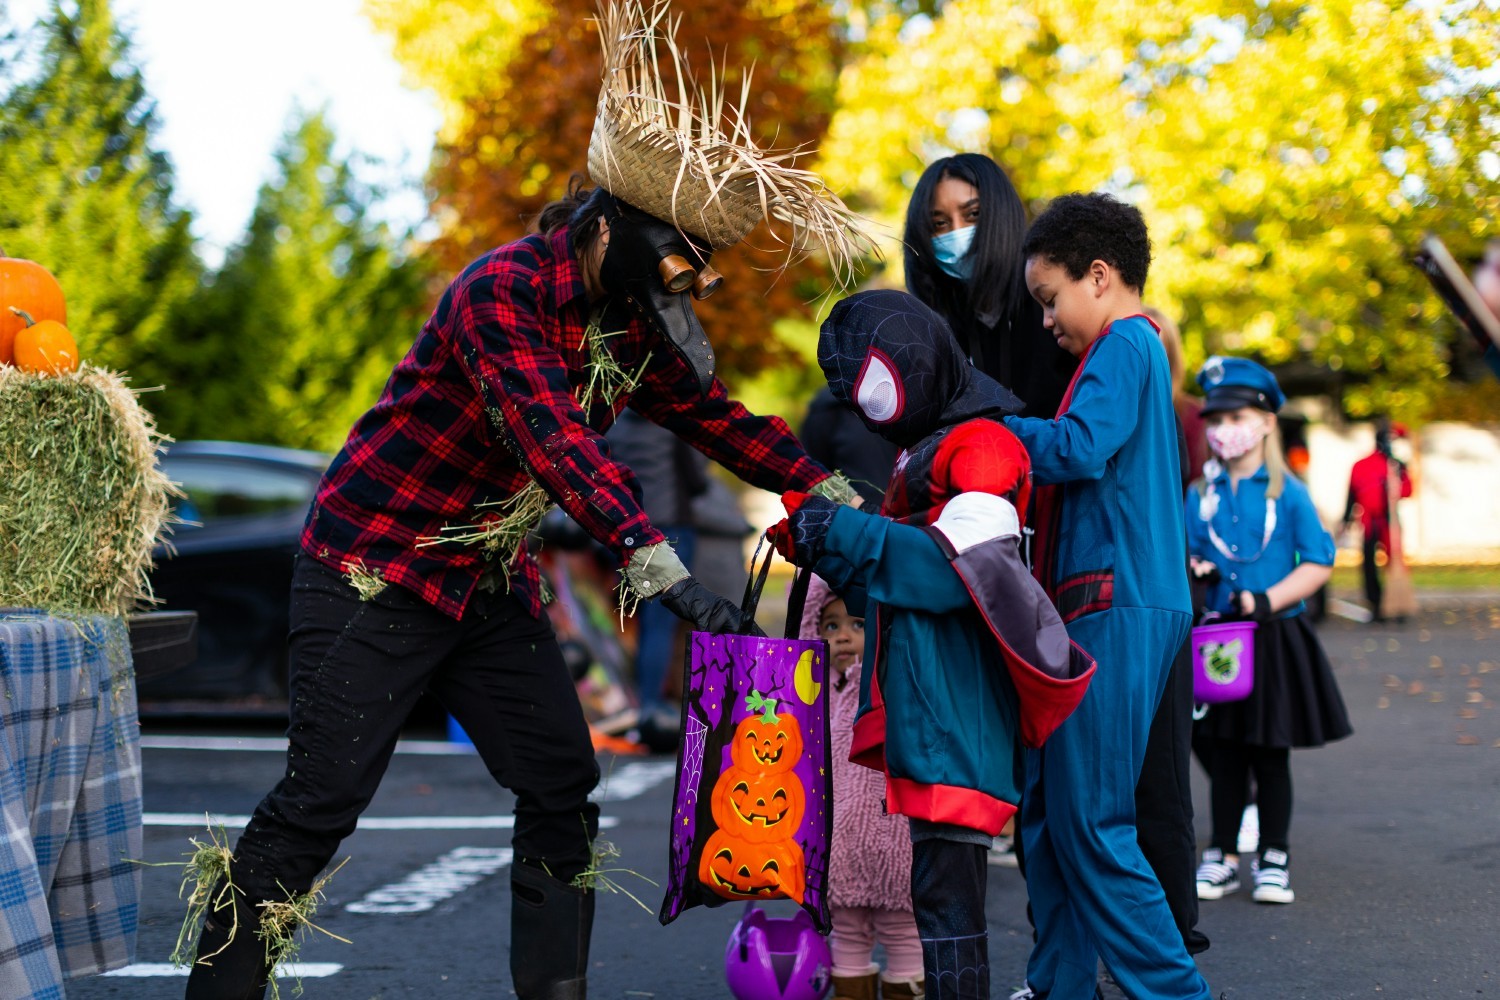 Trunk-or-Treat at its best! We love to make every holiday special for those wanting to celebrate and be nostalgic.